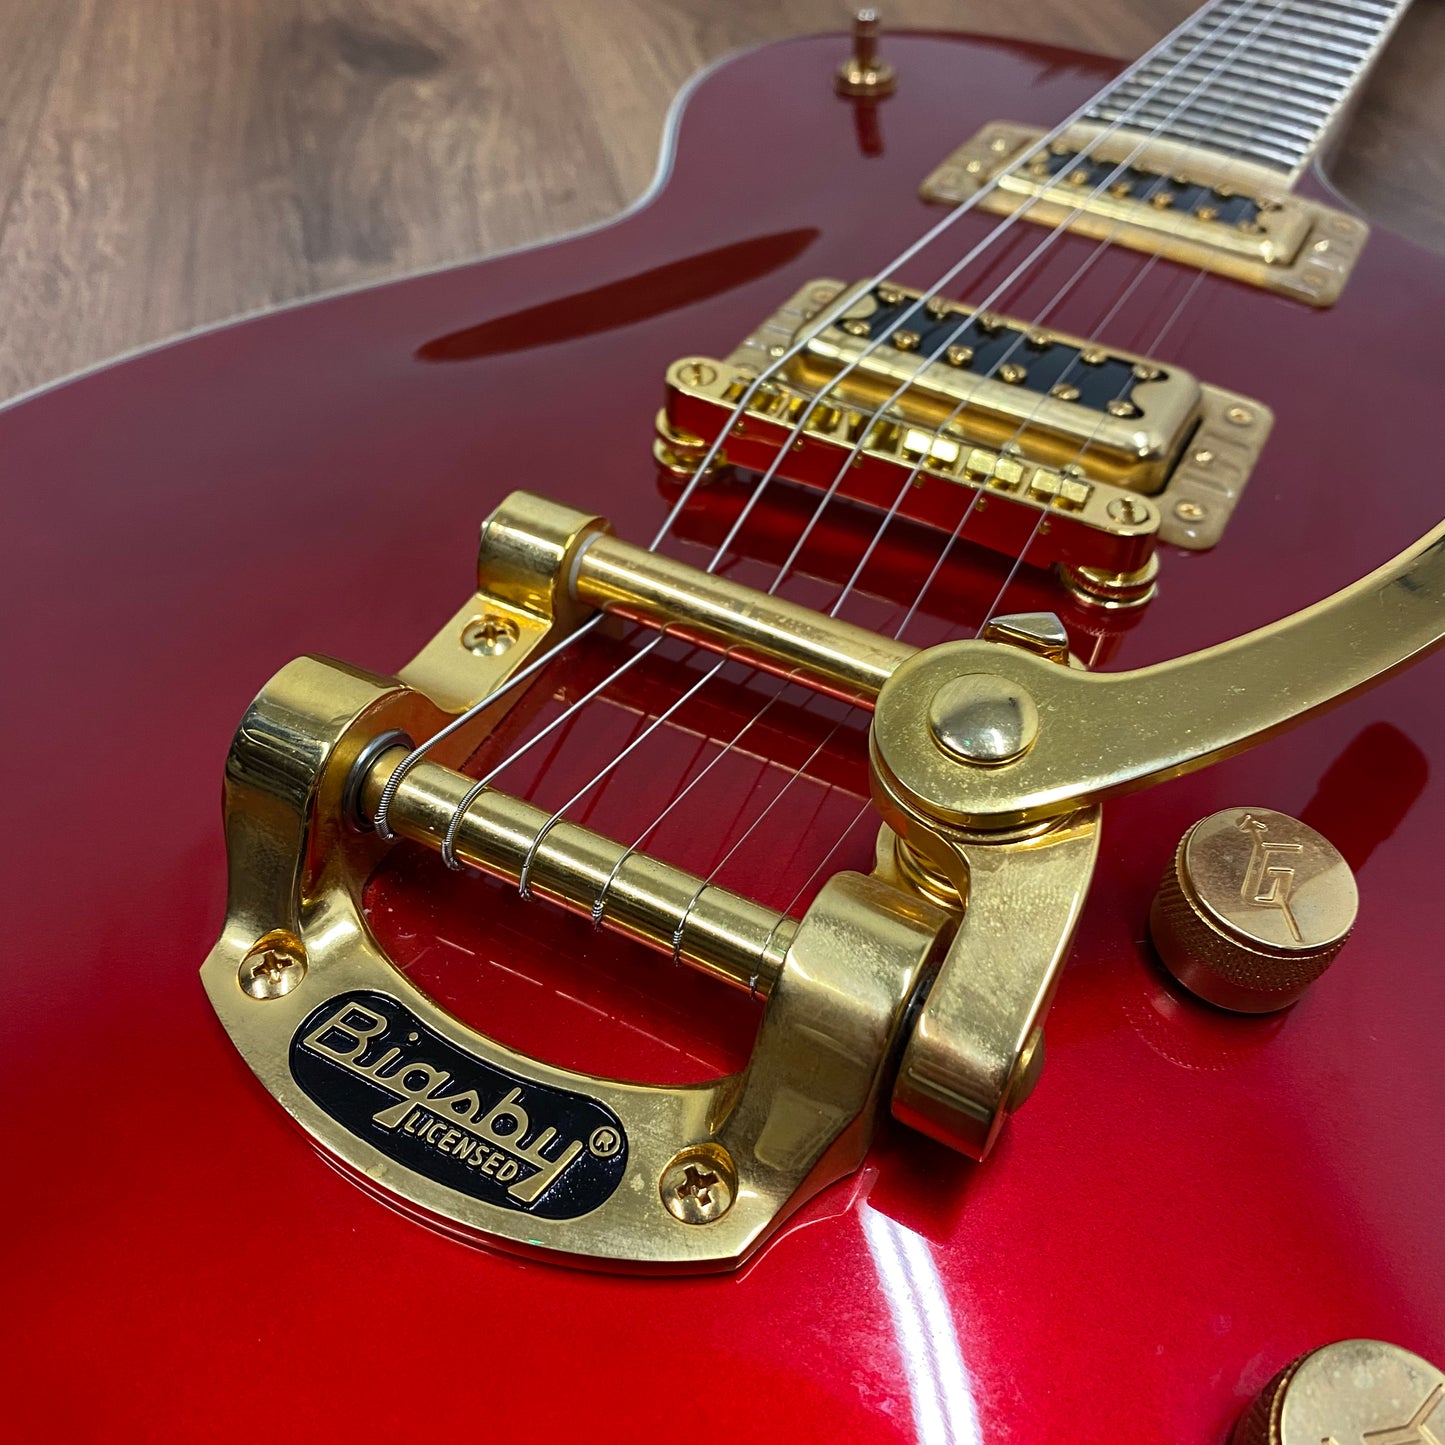 Pre-Owned Gretsch G5435TG Limited Edition Electromatic Pro Jet - Candy Apple Red